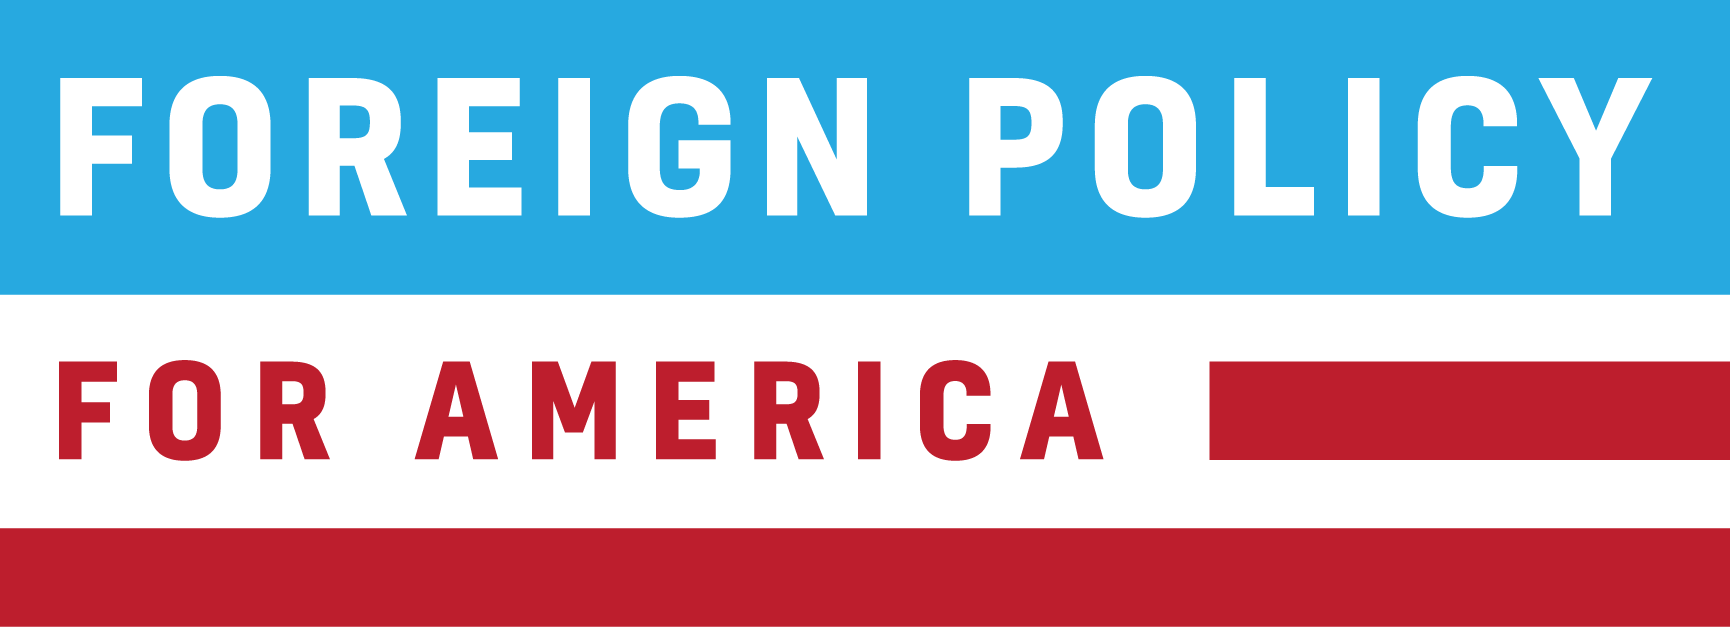 Foreign-Policy-for-America-Logos-01